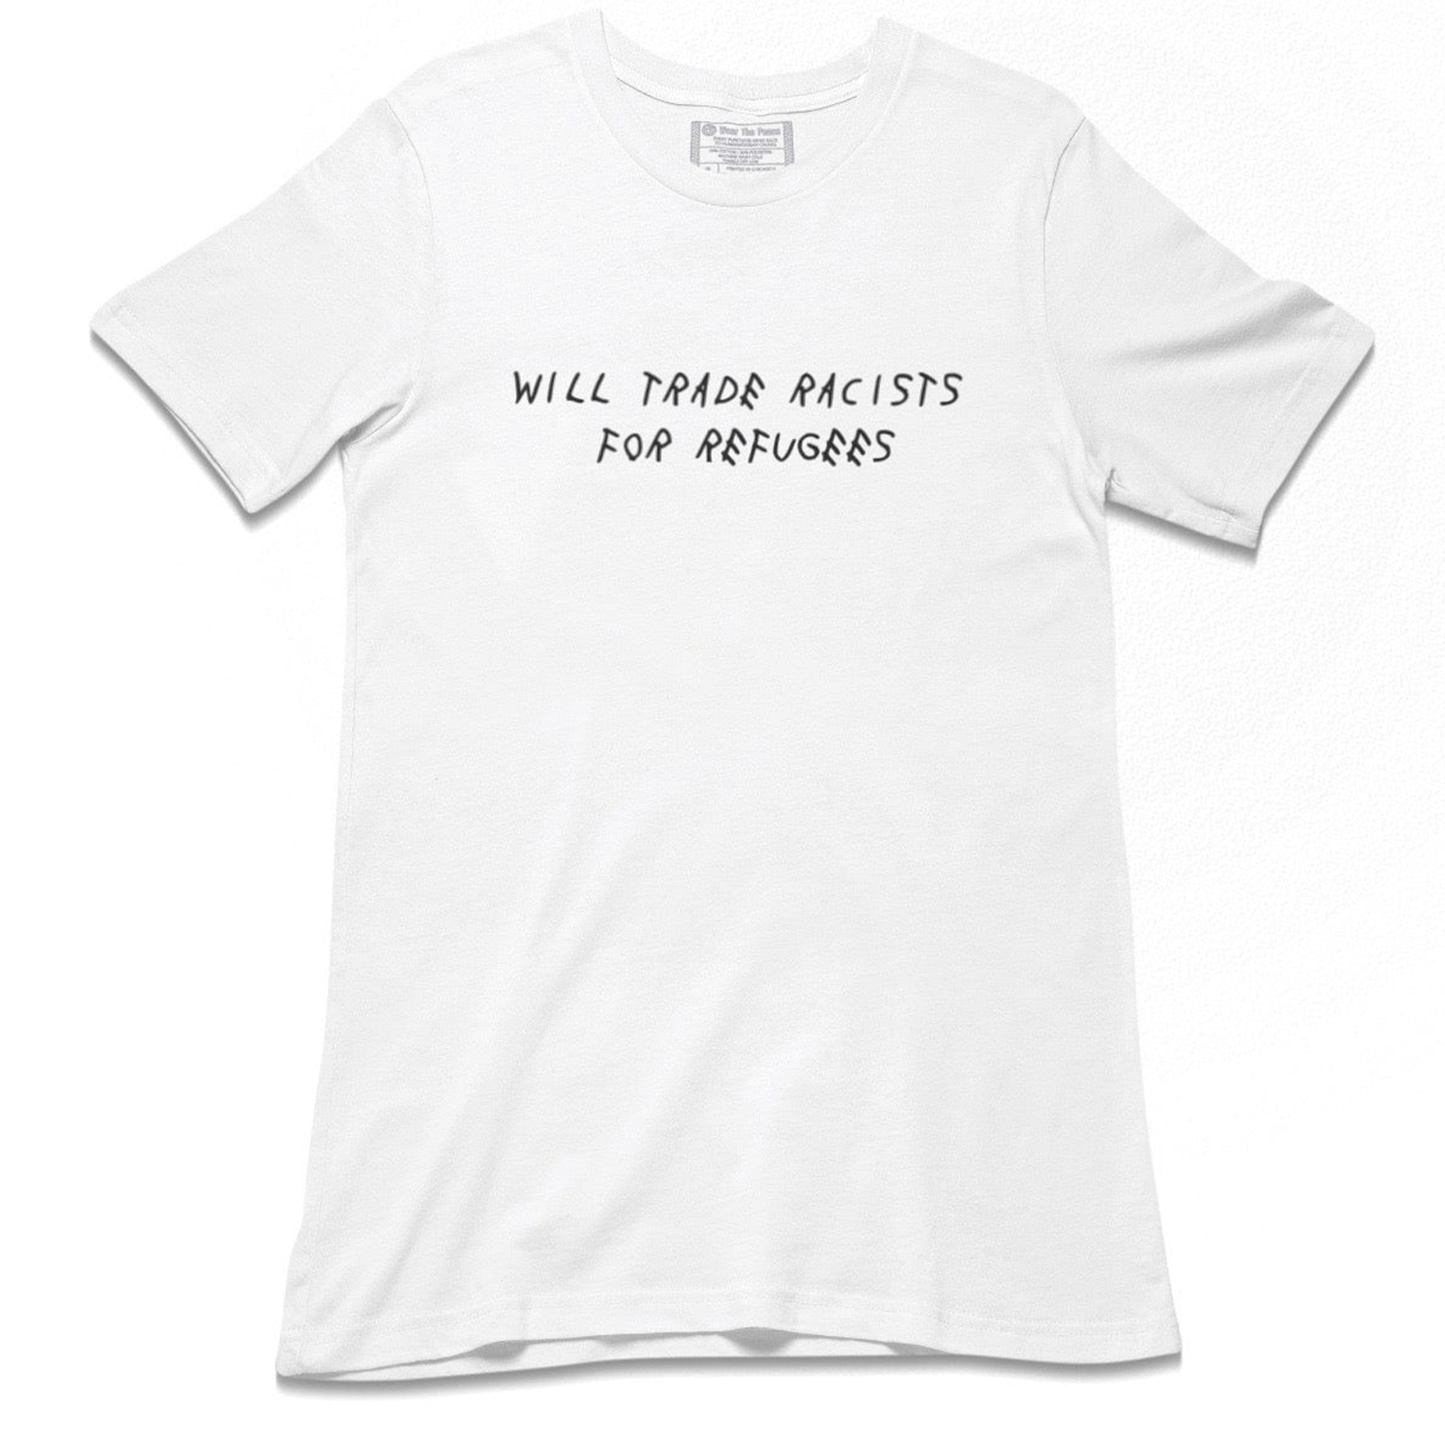 Trade Racists For Refugees Tee